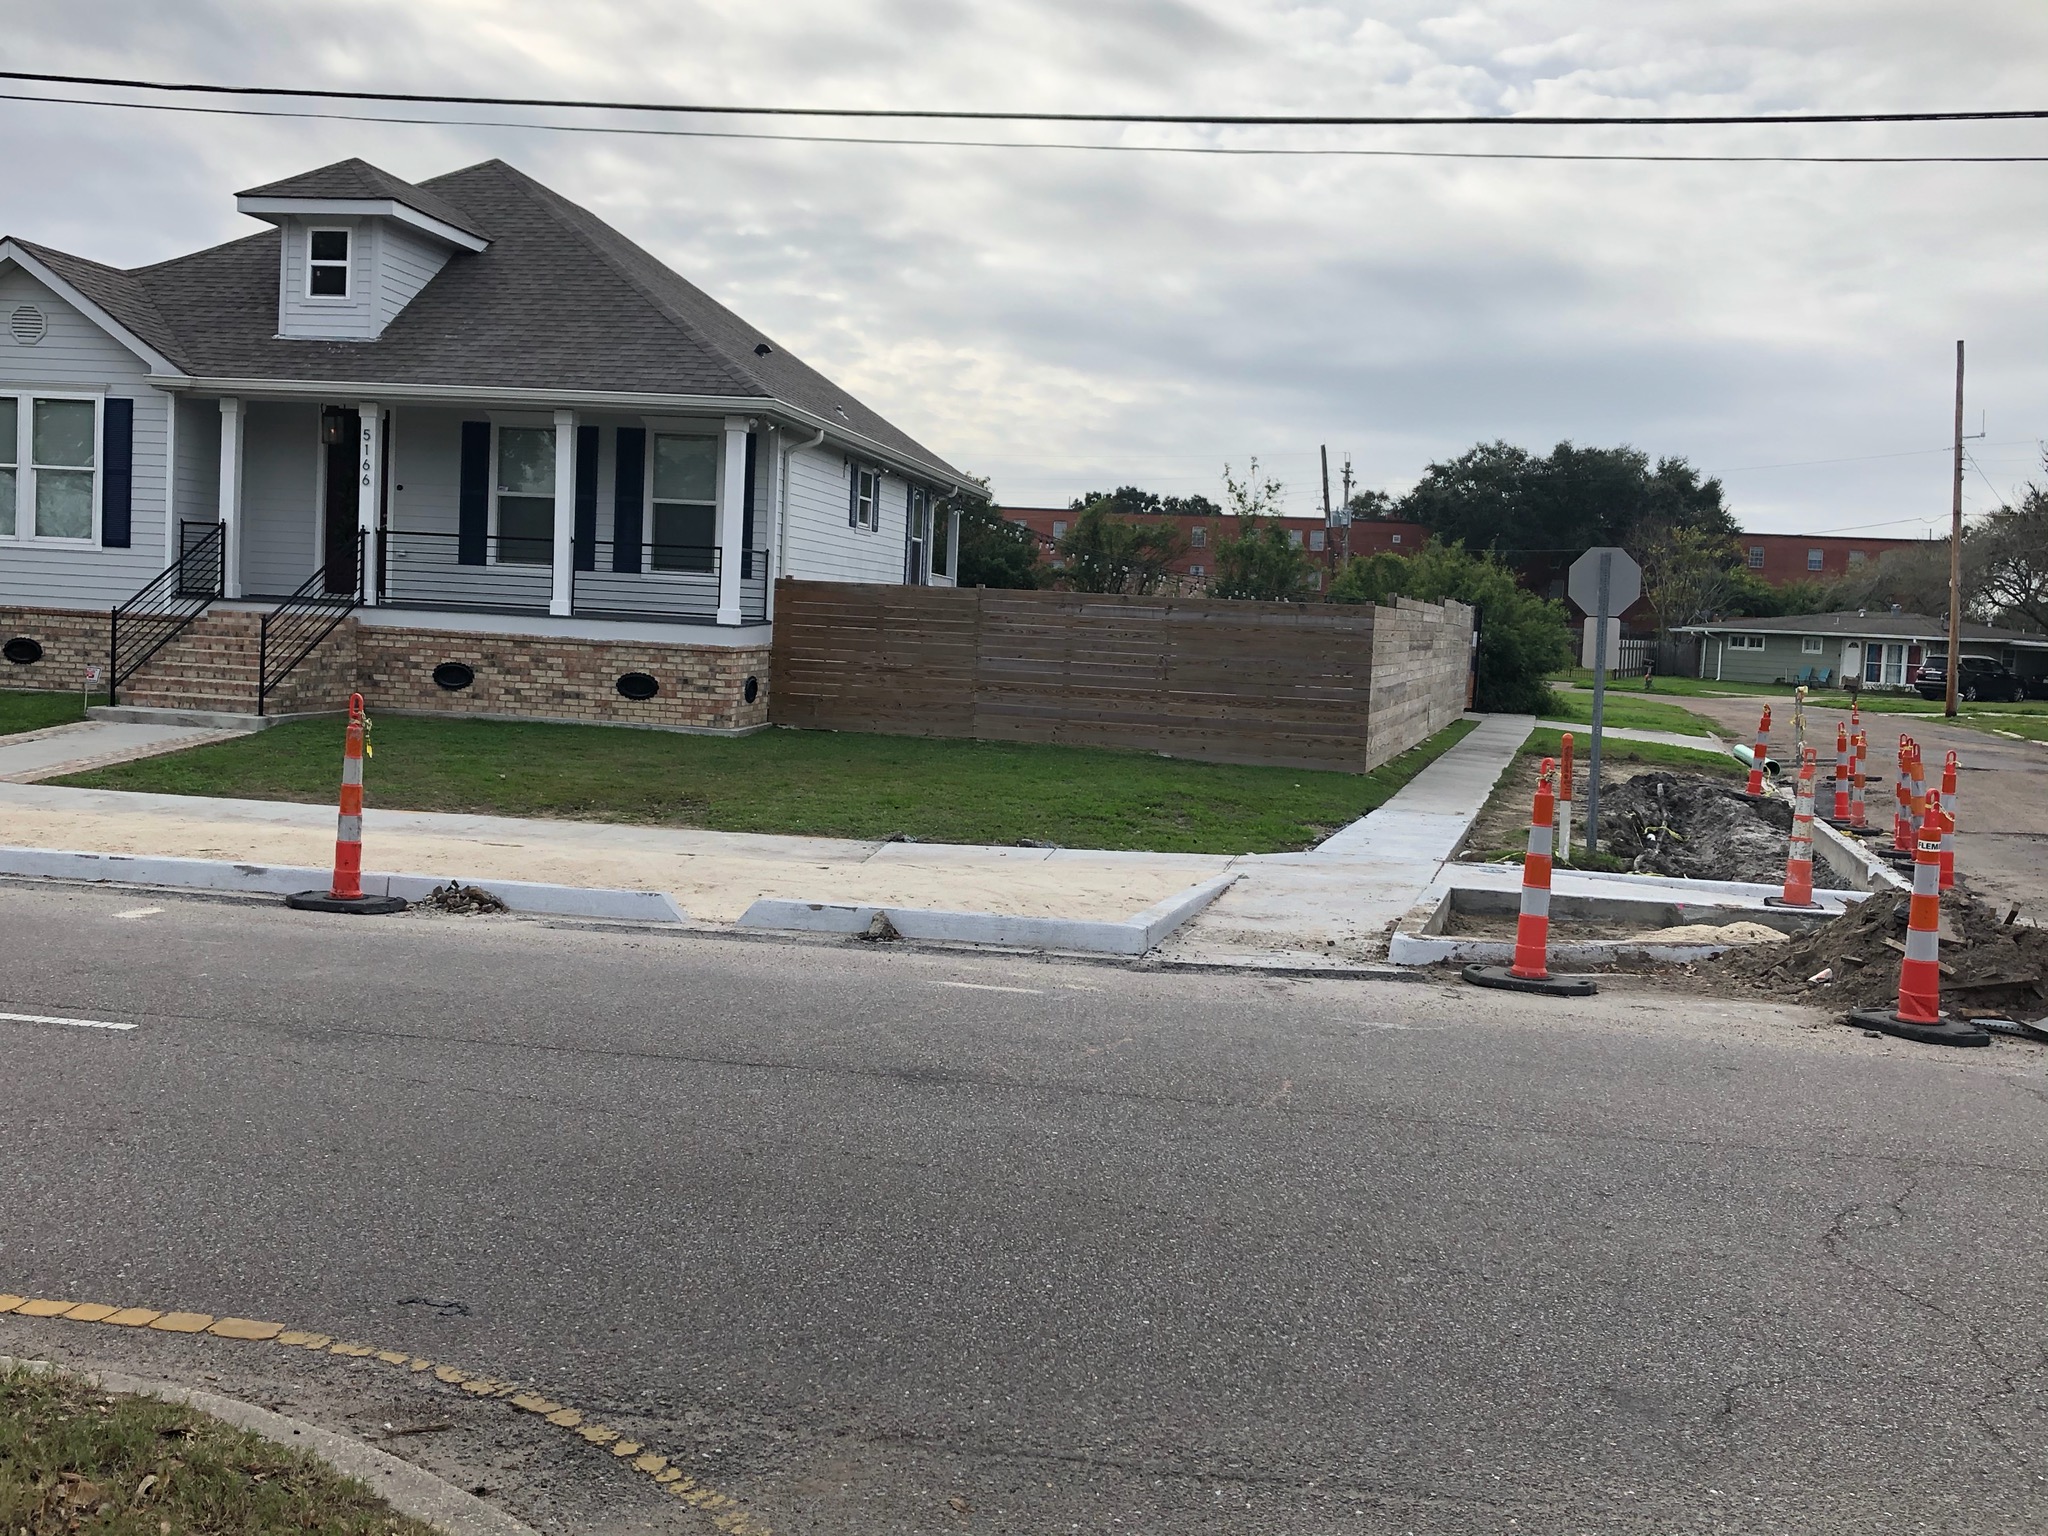 PONTILLY NEIGHBORHOOD STORMWATER NETWORK REACHES 50 PERCENT COMPLETION